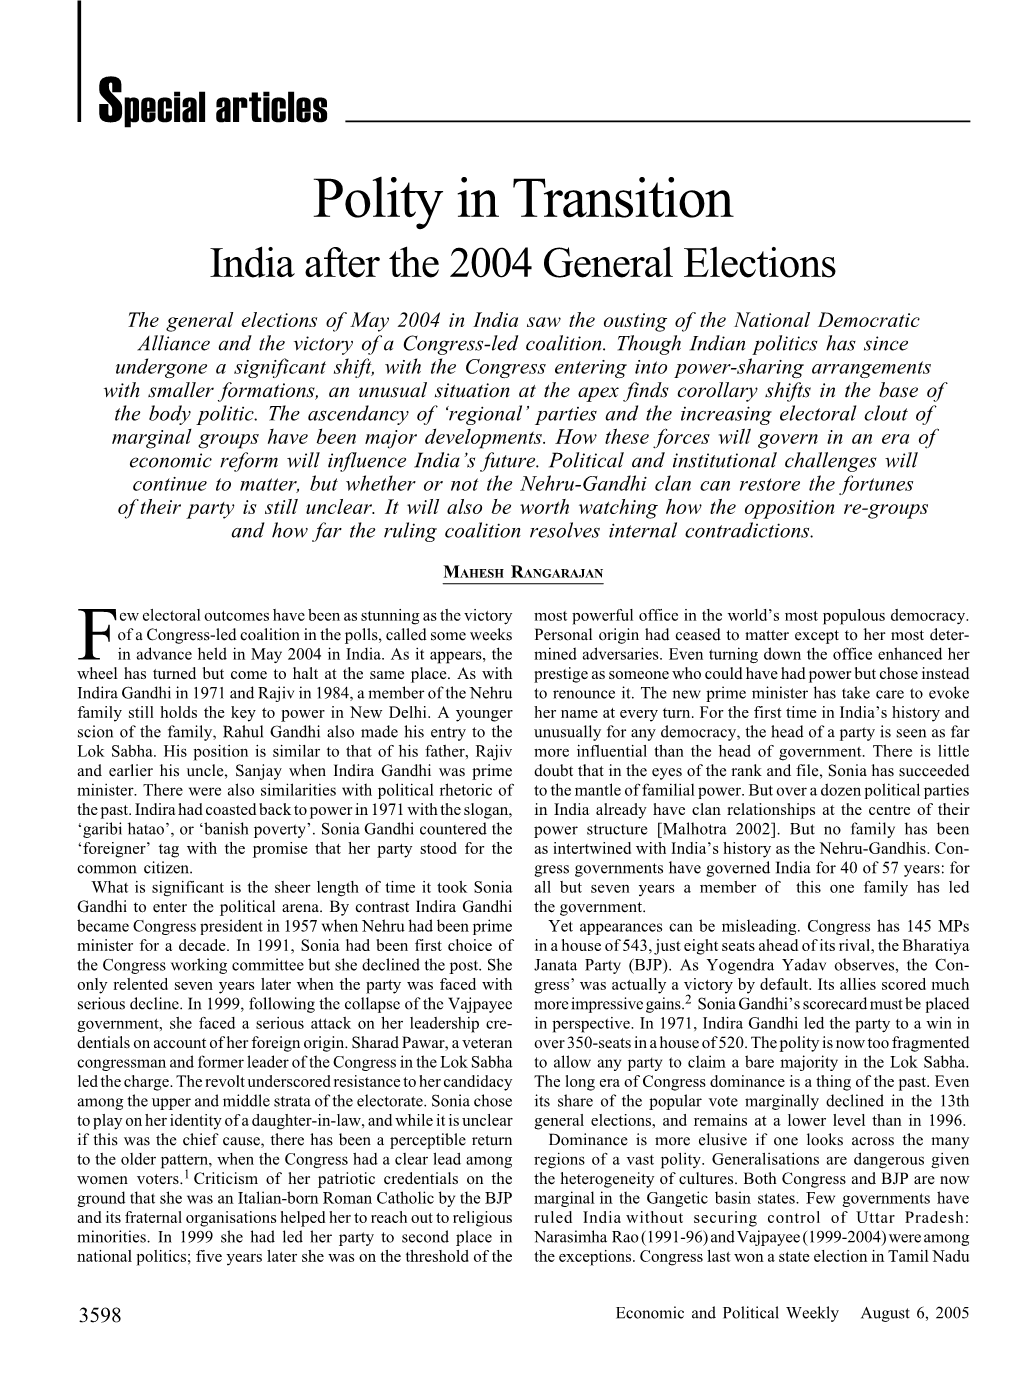 Polity in Transition India After the 2004 General Elections